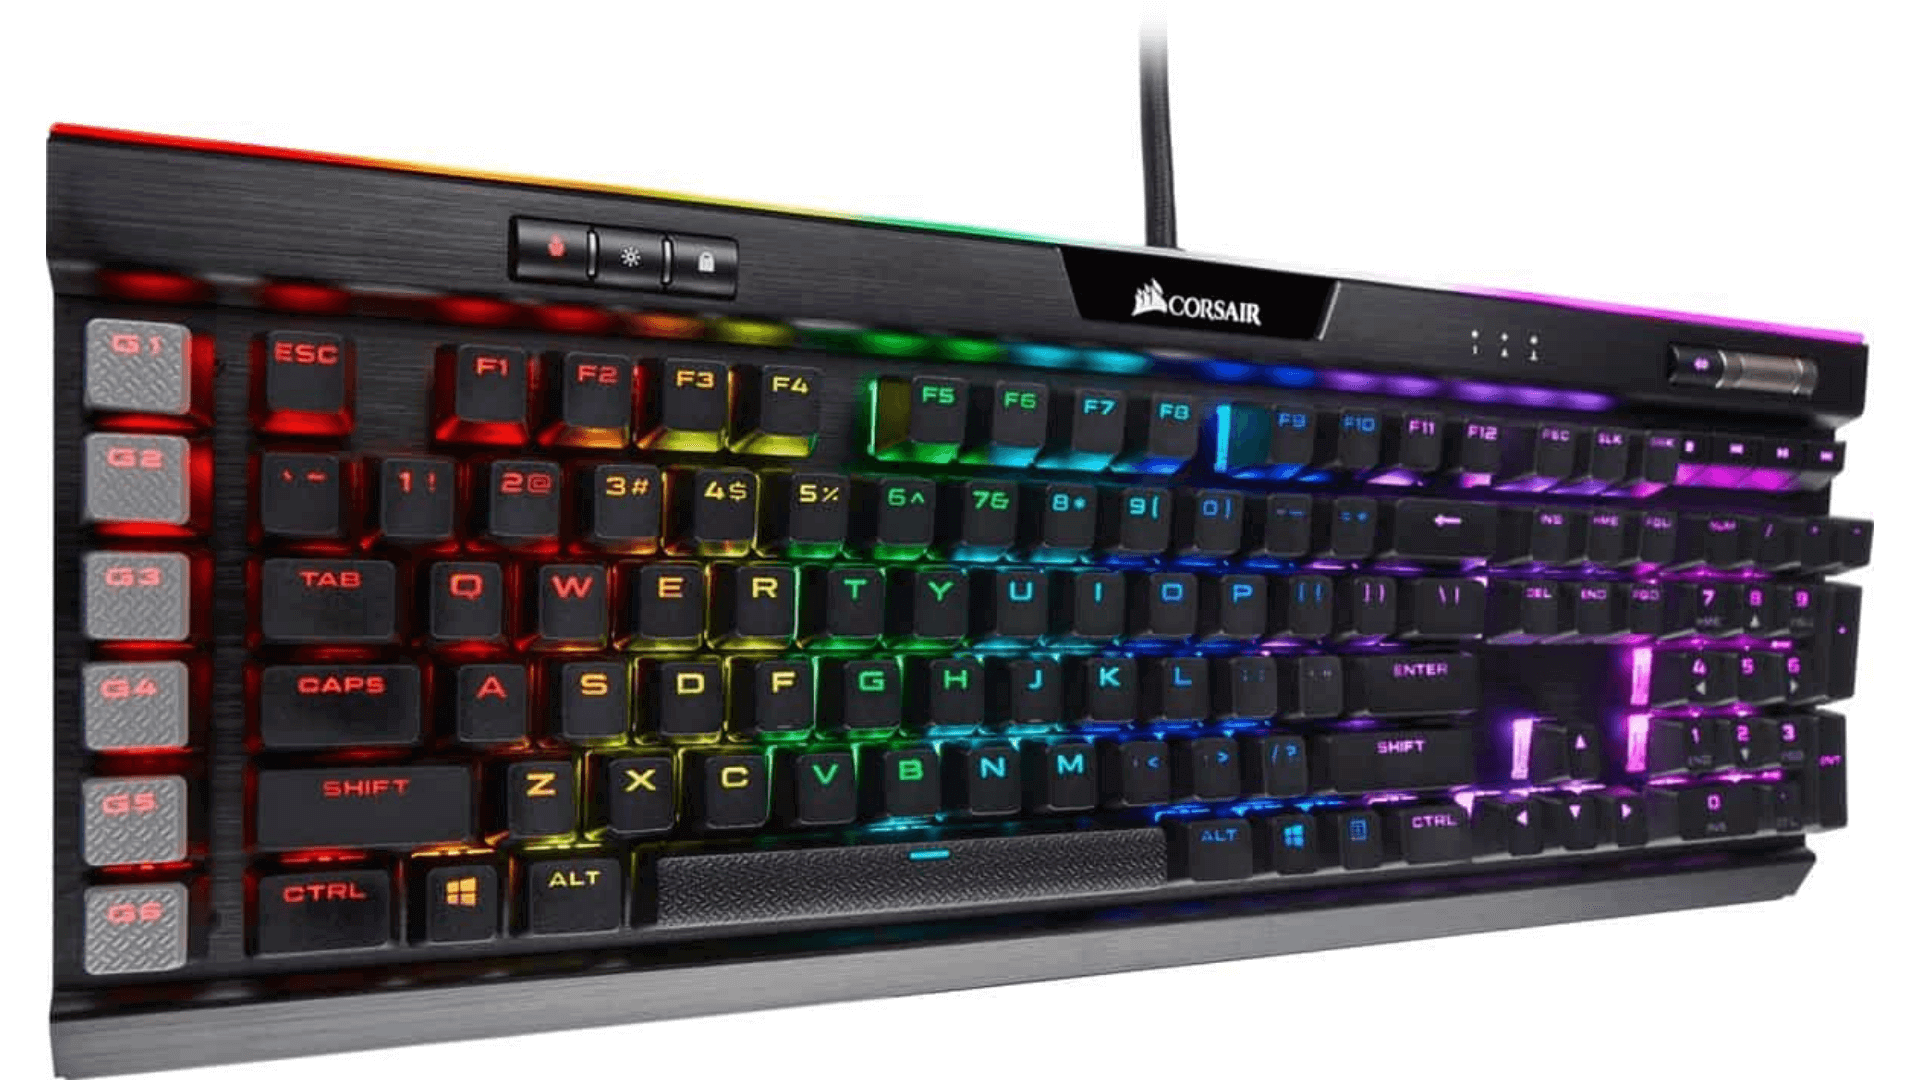 GCG List Of Best Gaming Keyboards For Pro Gamers 1